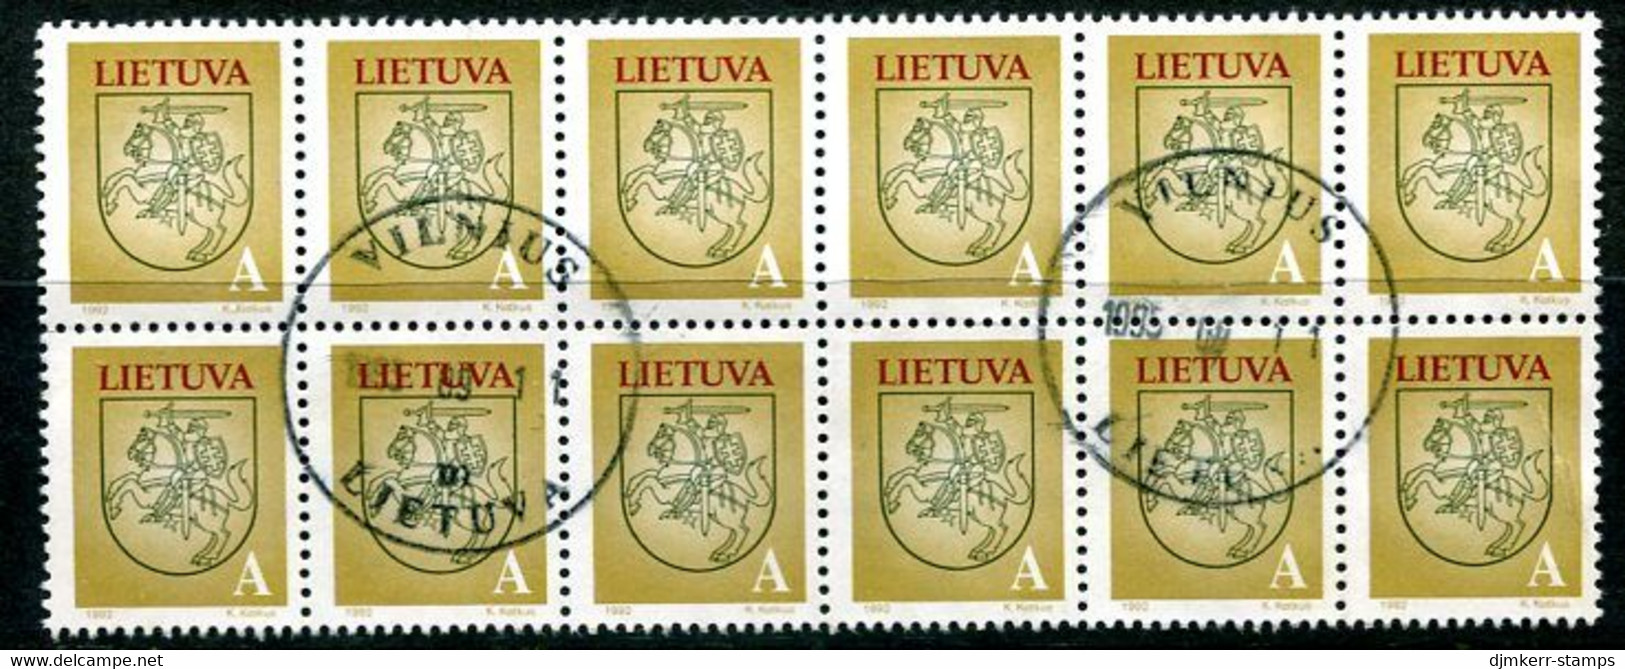 LITHUANIA 1993 Arms Definitive Rate A Block Of 12 Used.  Michel 531 - Lituania